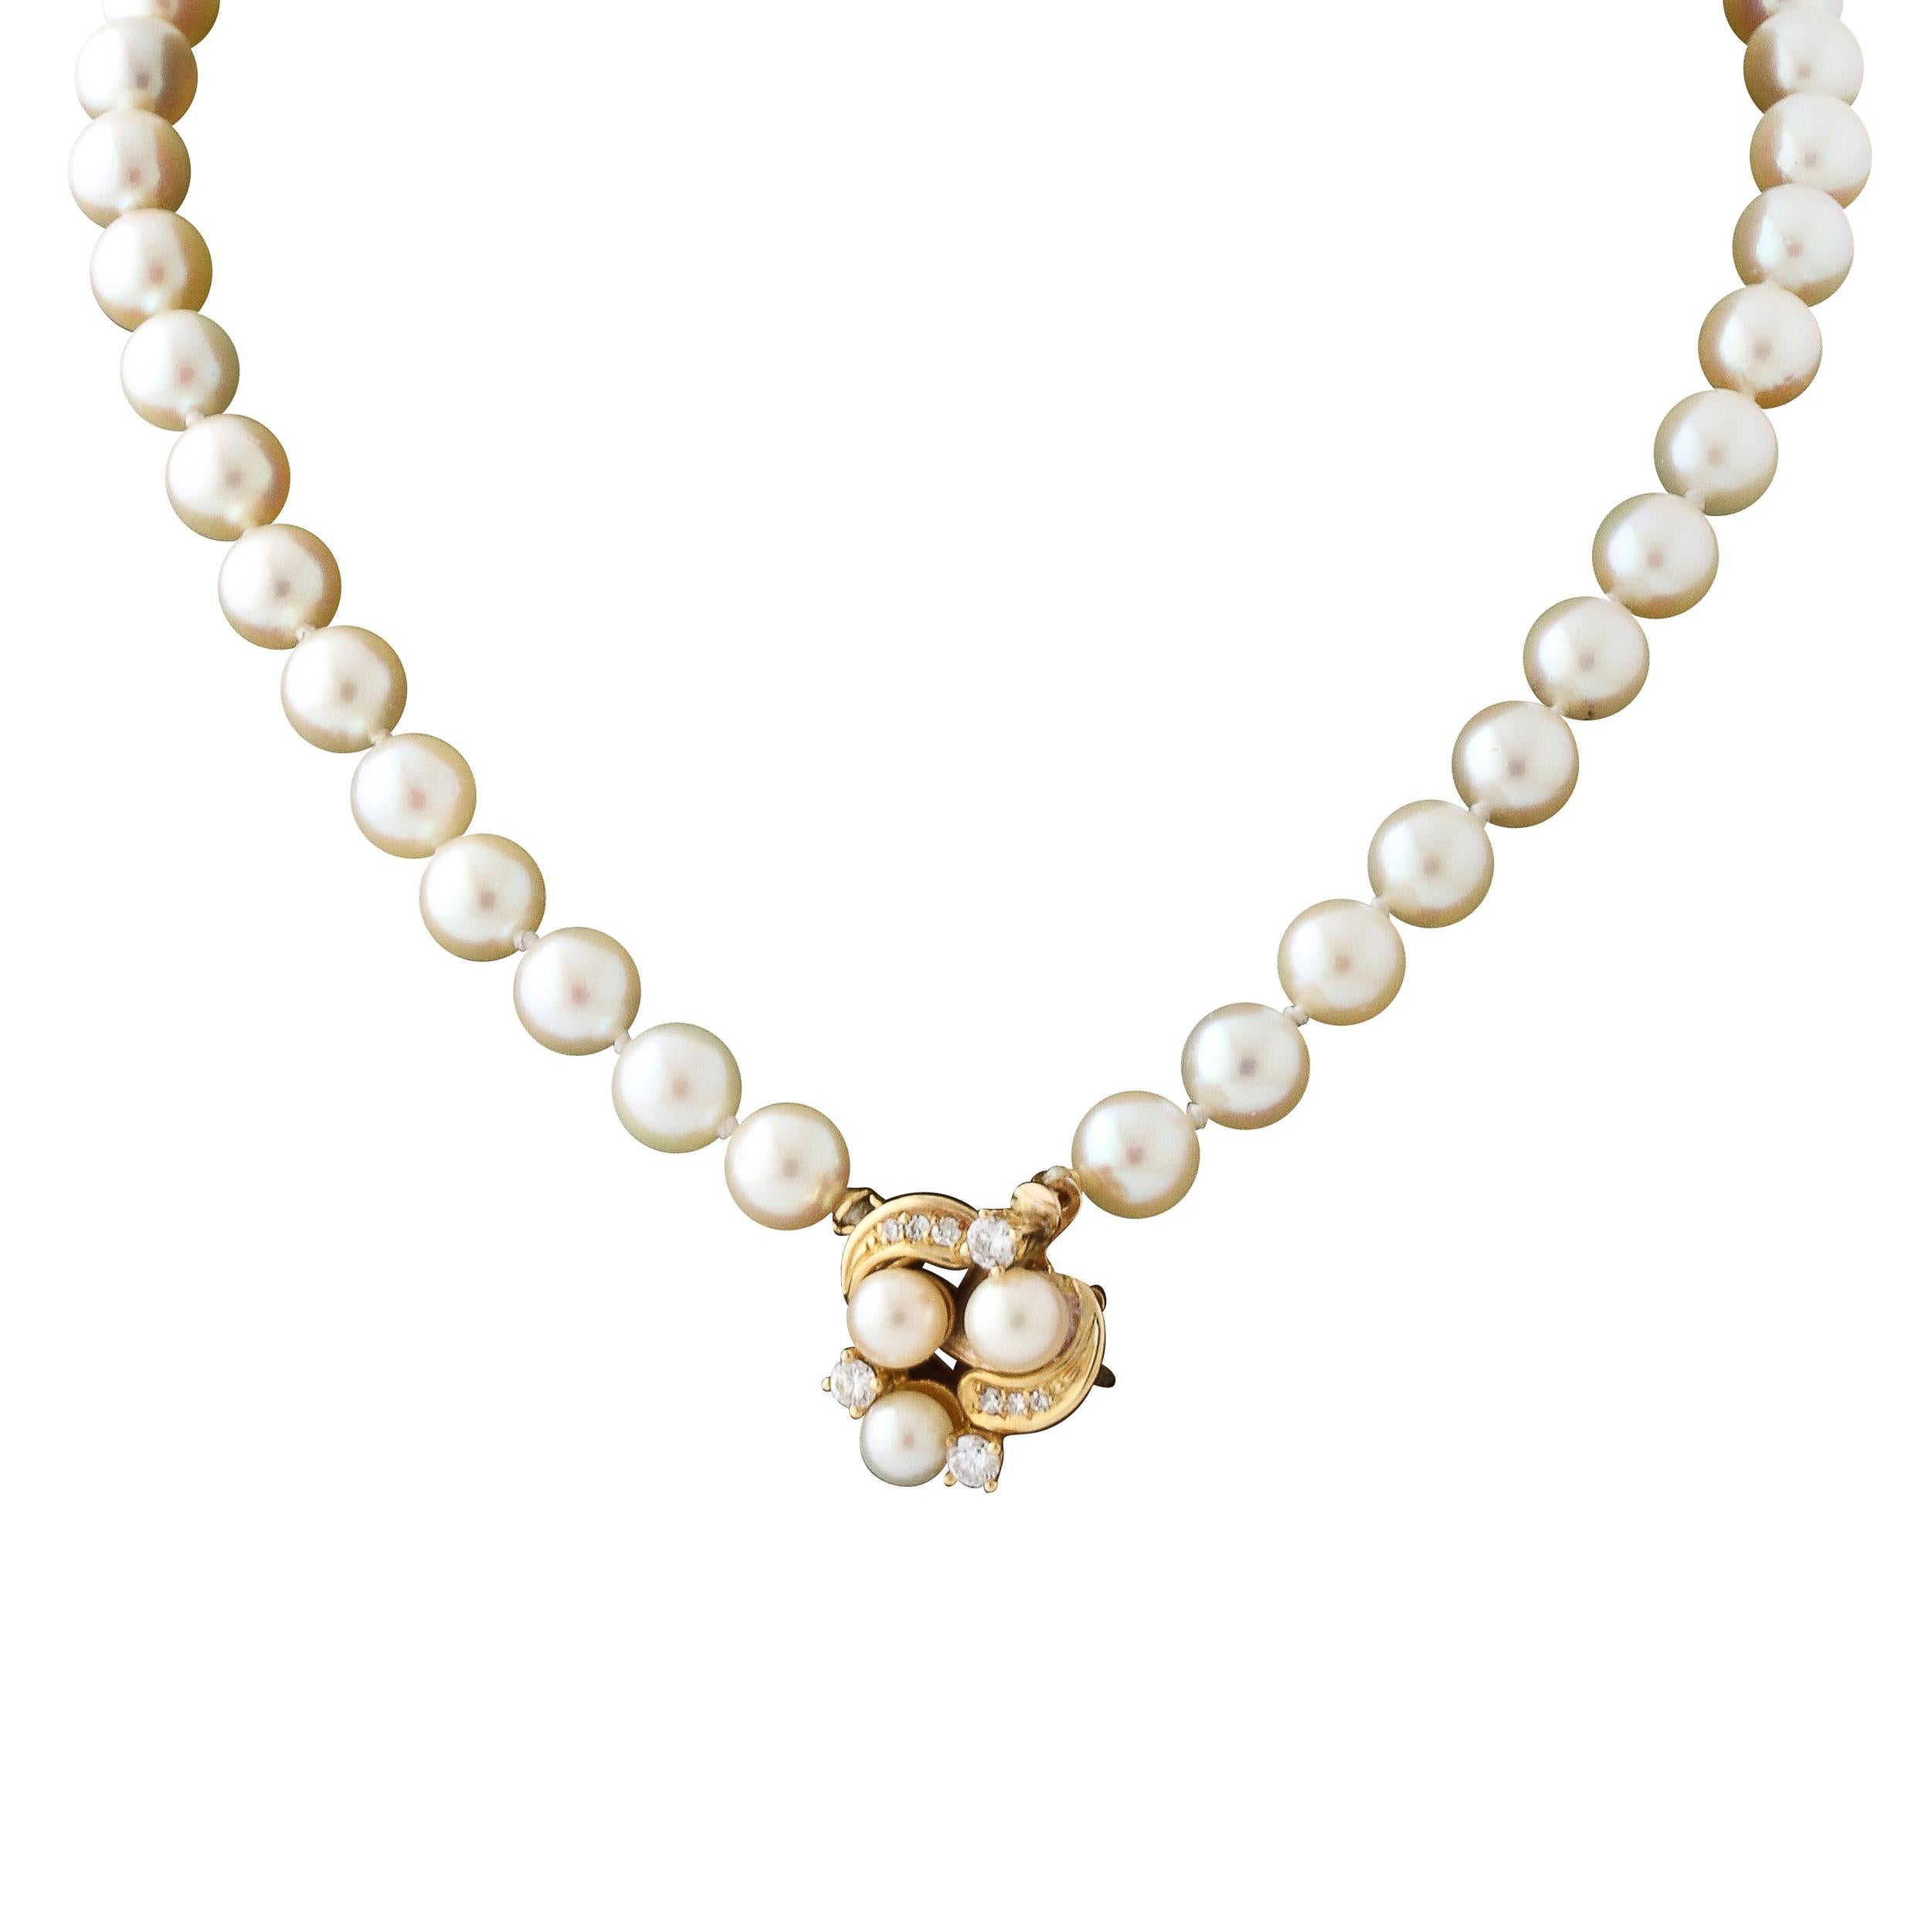 This classic and elegant pearl necklace features 56  6mm pearls set with a clasp in 14k yellow gold set with 9 brilliant cut diamonds and 3 pearls . A perfect bridal gift. The clasp can be worn in the front or the back changing the look of this